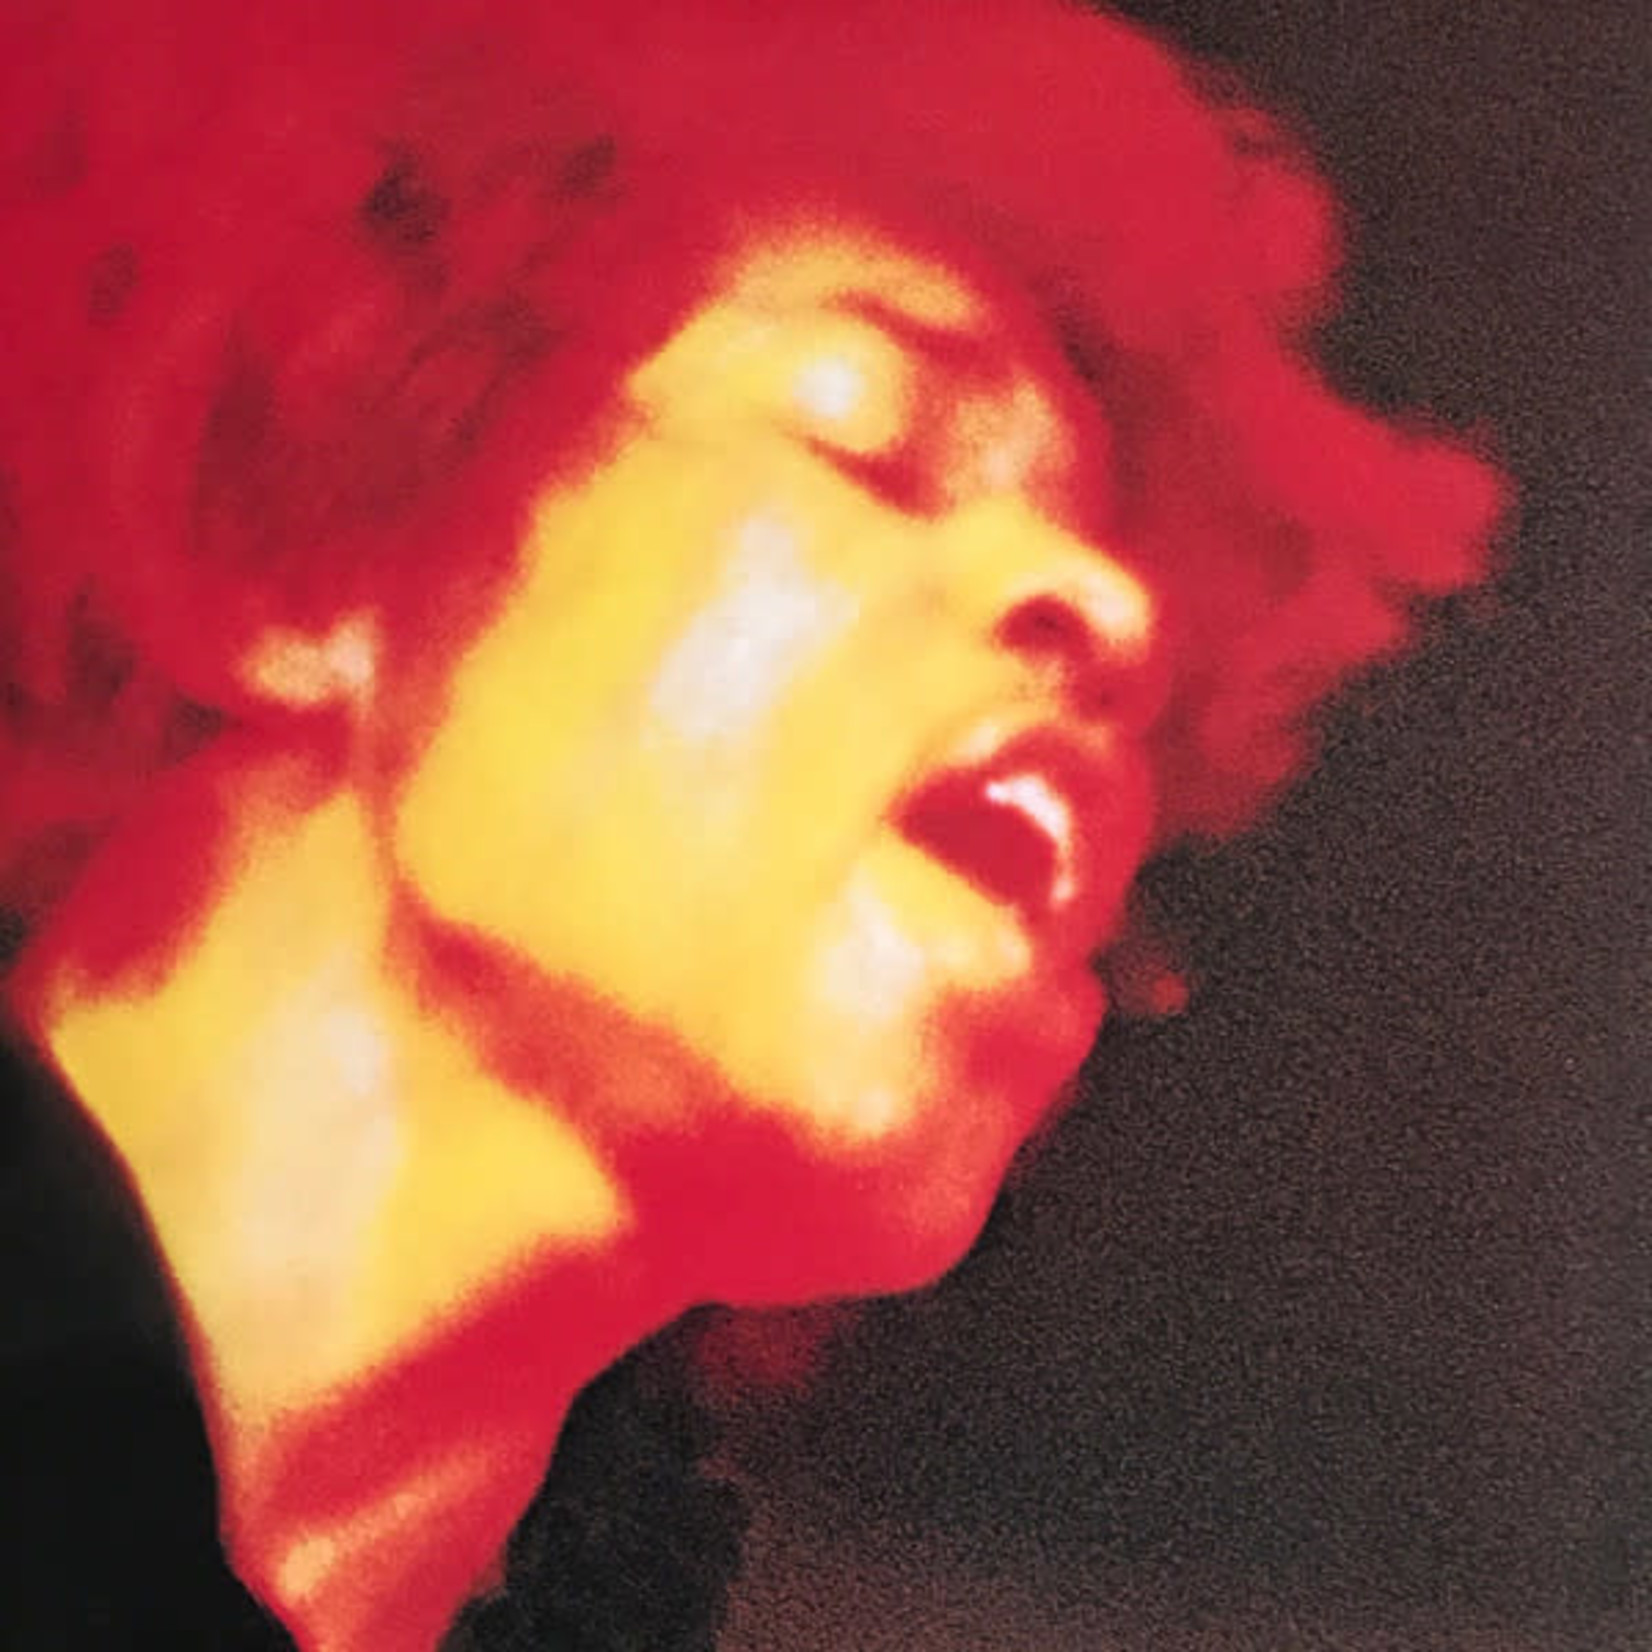 [Vintage] Jimi Hendrix - Electric Ladyland (solid brown Reprise reissue)